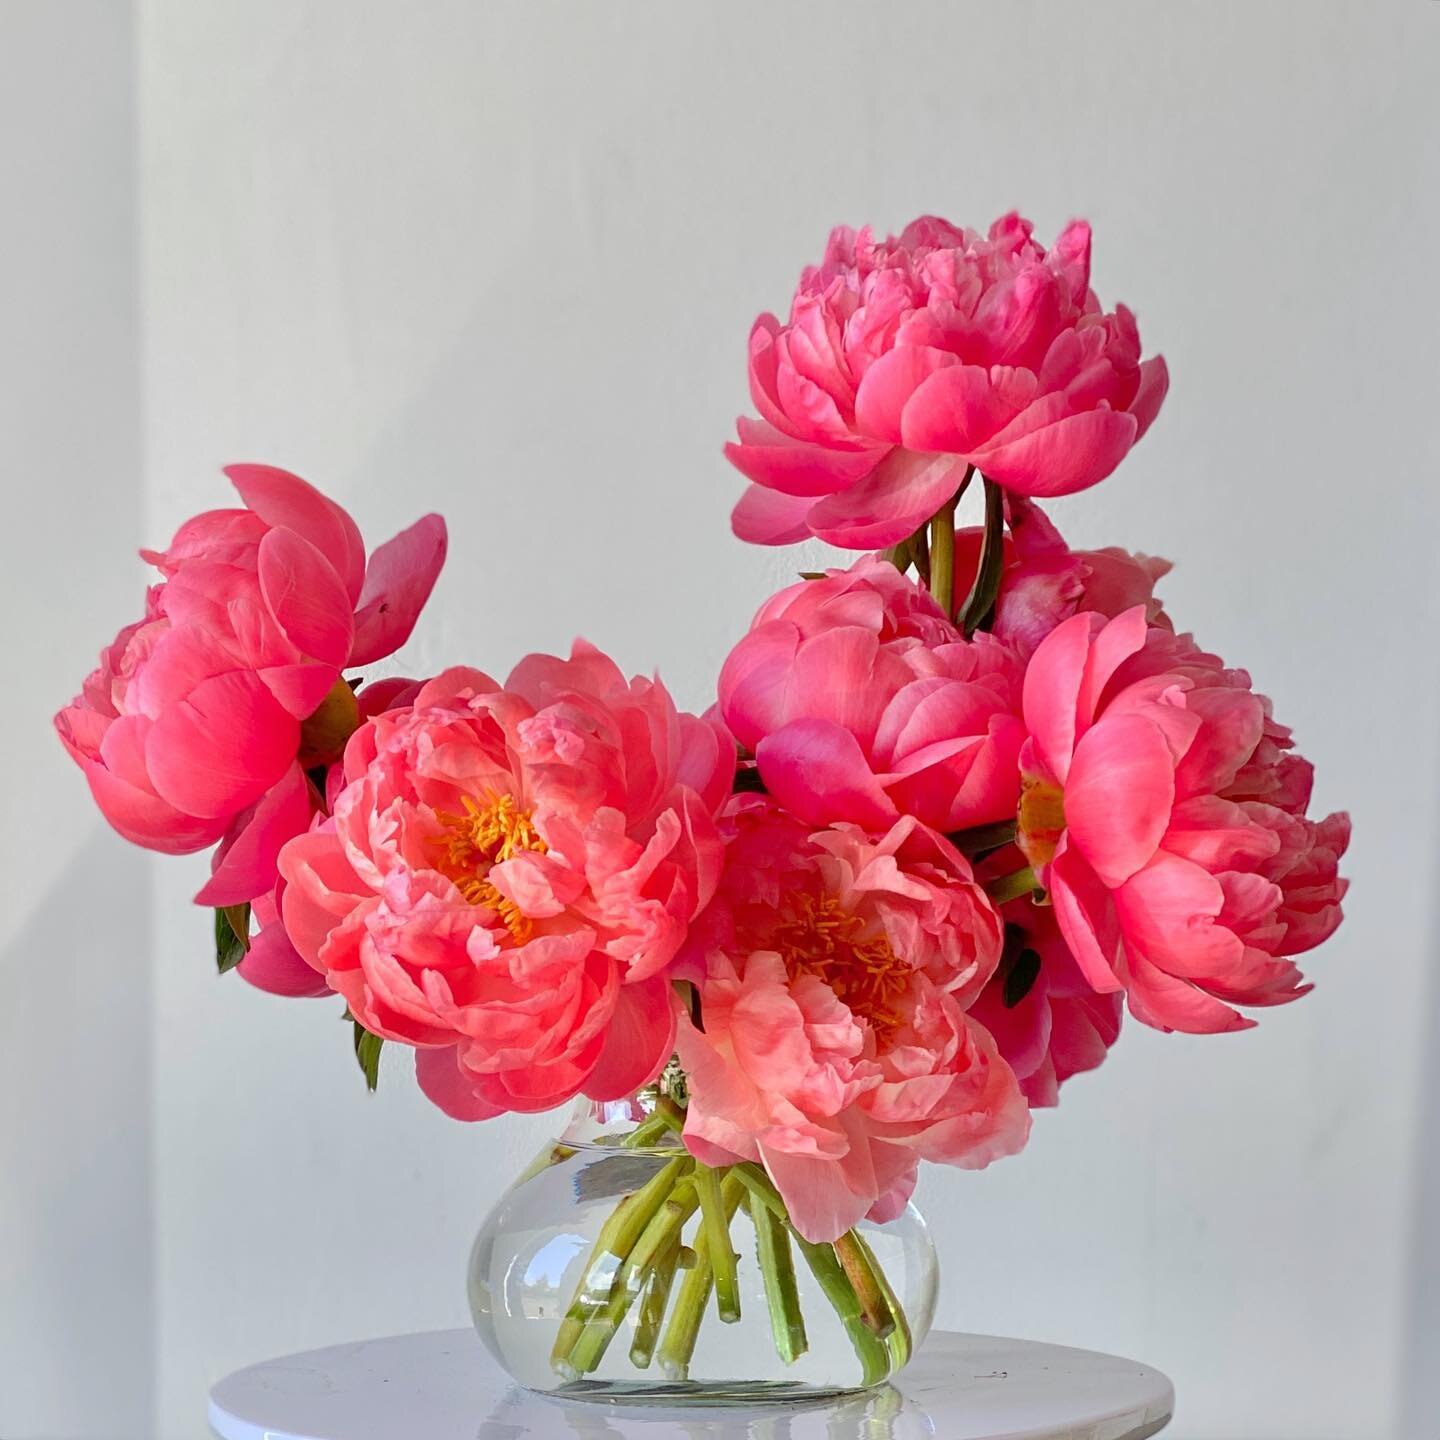 Coral. Charm. Peony. 

I do love a million varieties in a palette but at times it feels fresh to design with just one. 

&hellip;

#passionforflowers #floraldesigner #eventflorist #flowers #floristry #creativeflowers #scultpturalflowers #floralarrang